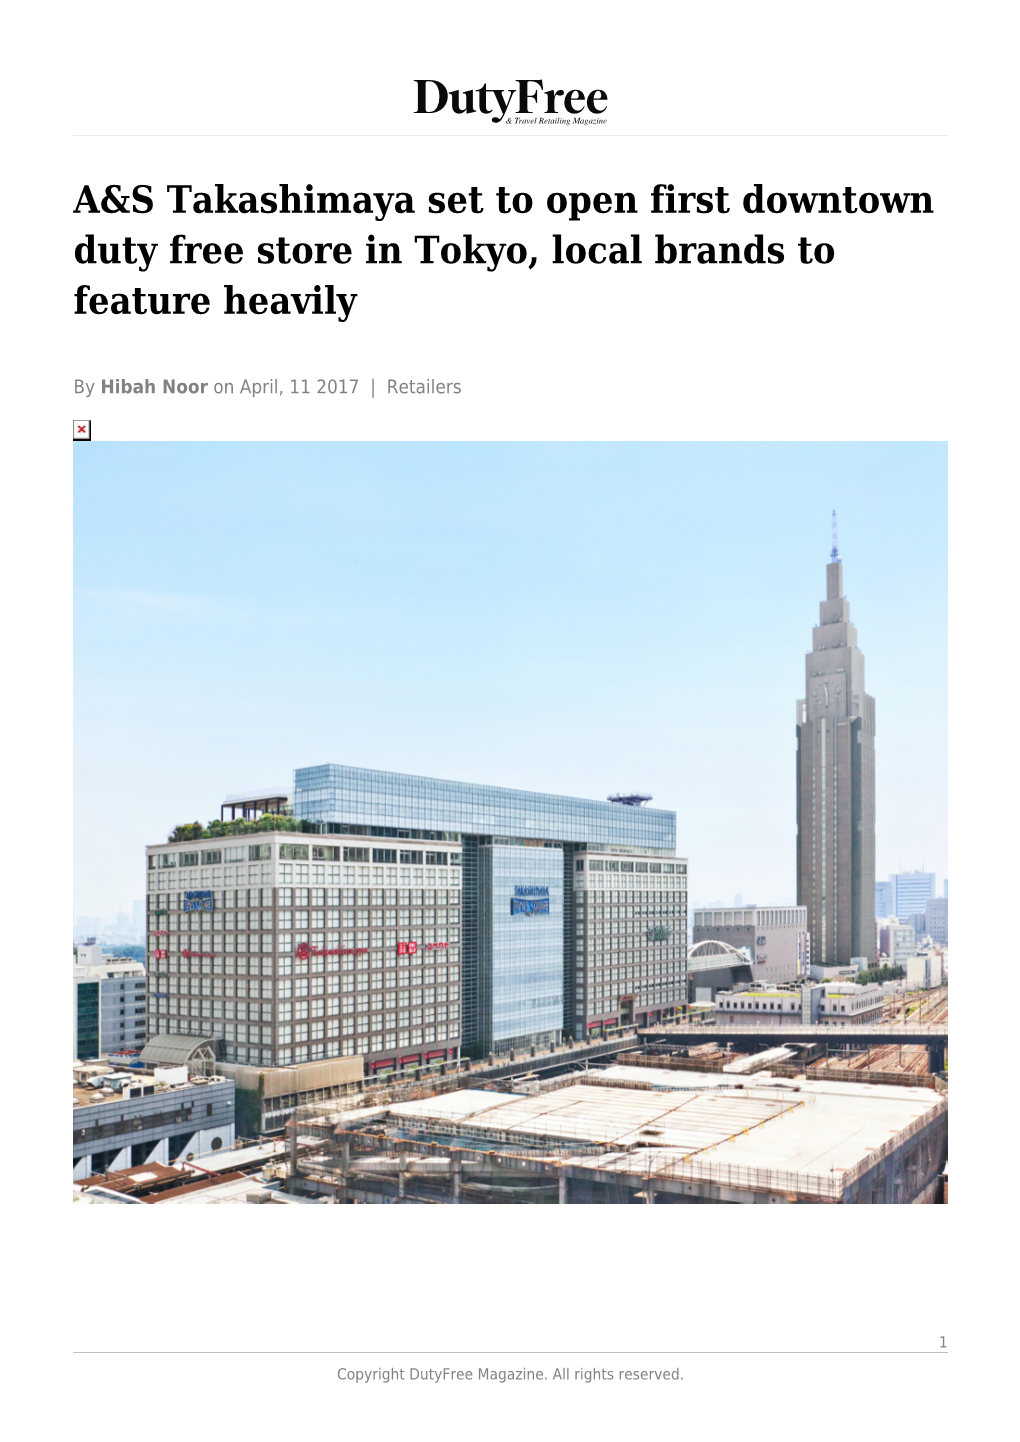 A&S Takashimaya Set to Open First Downtown Duty Free Store in Tokyo, Local Brands to Feature Heavily